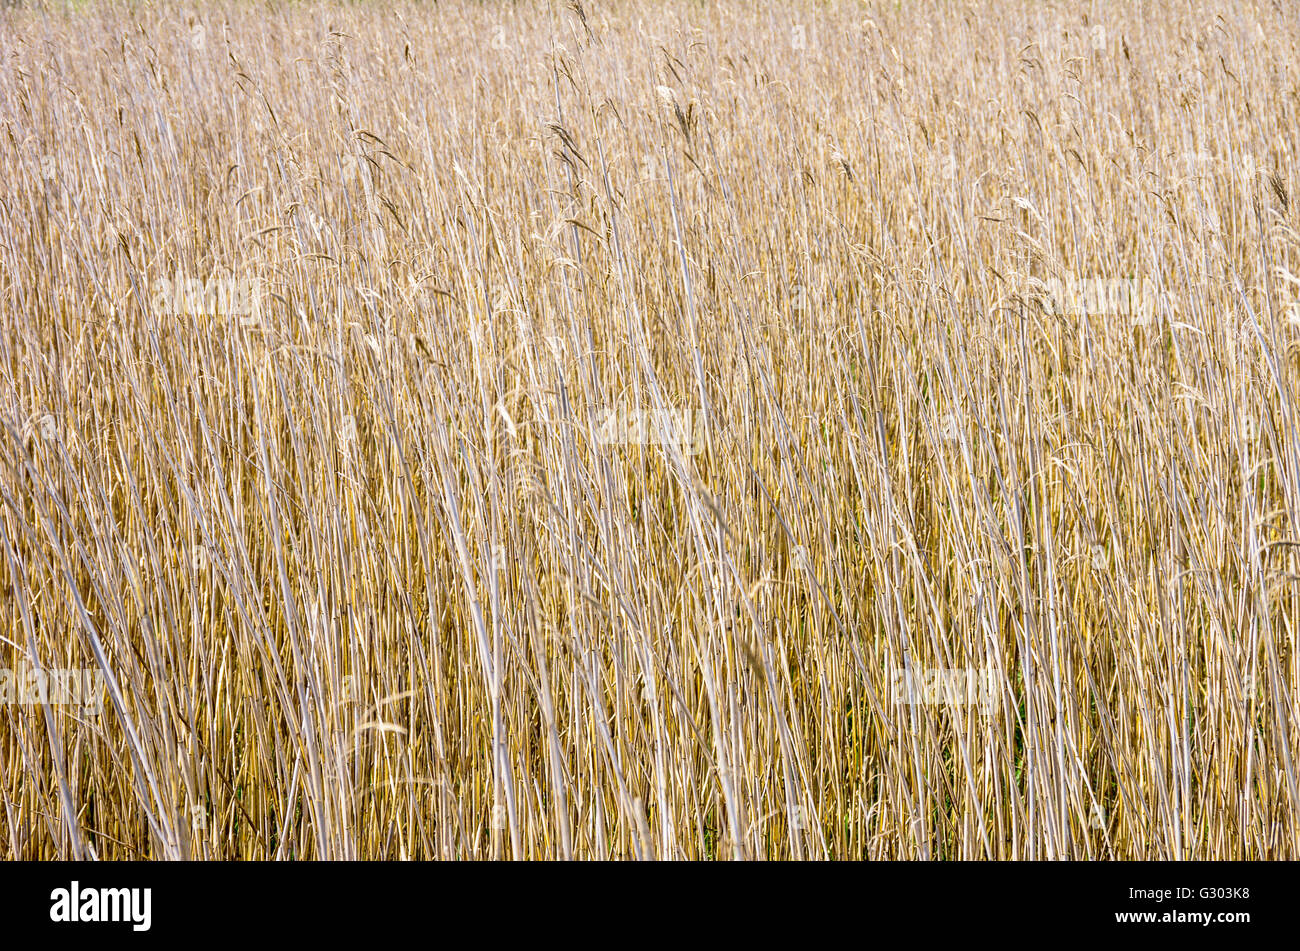 REED BED Stock Photo